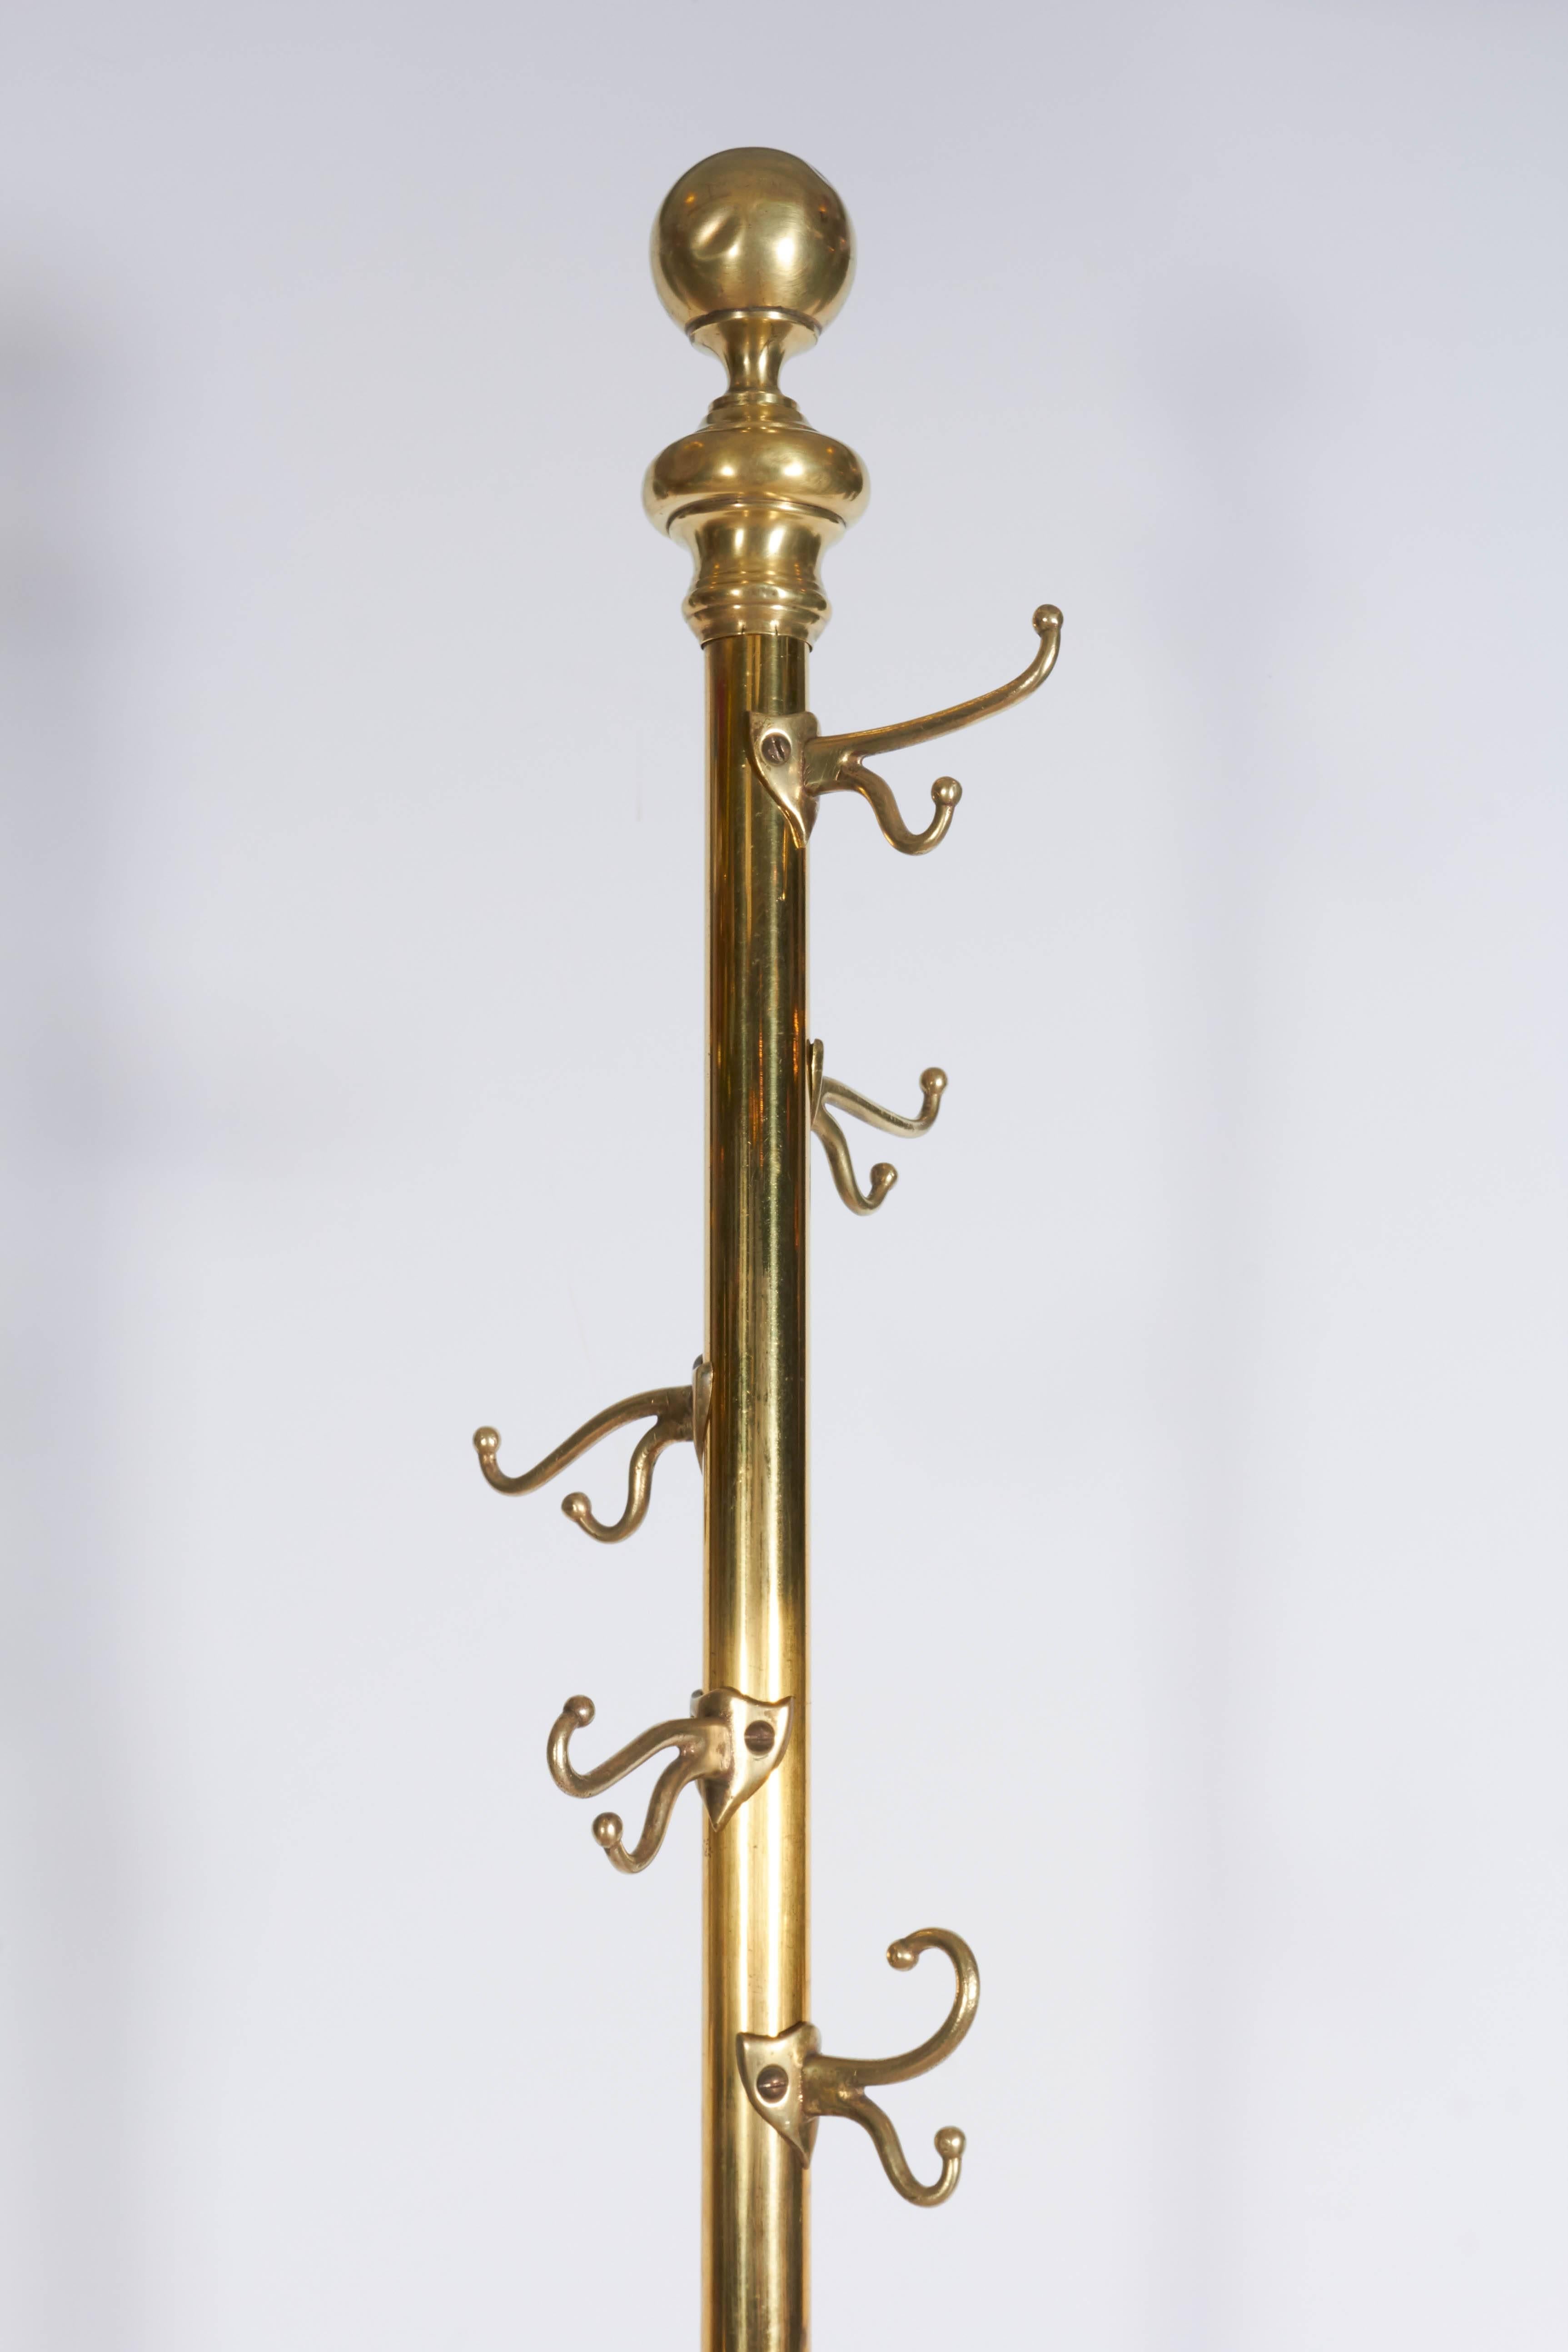 An Italian polished brass coat rack, produced within the Victorian period, circa 1880s, surmounted by ball finial, scroll hooks to stem, raised on elaborate tripod base with hairy paw feet. Excellent antique condition, wear consistent with age and